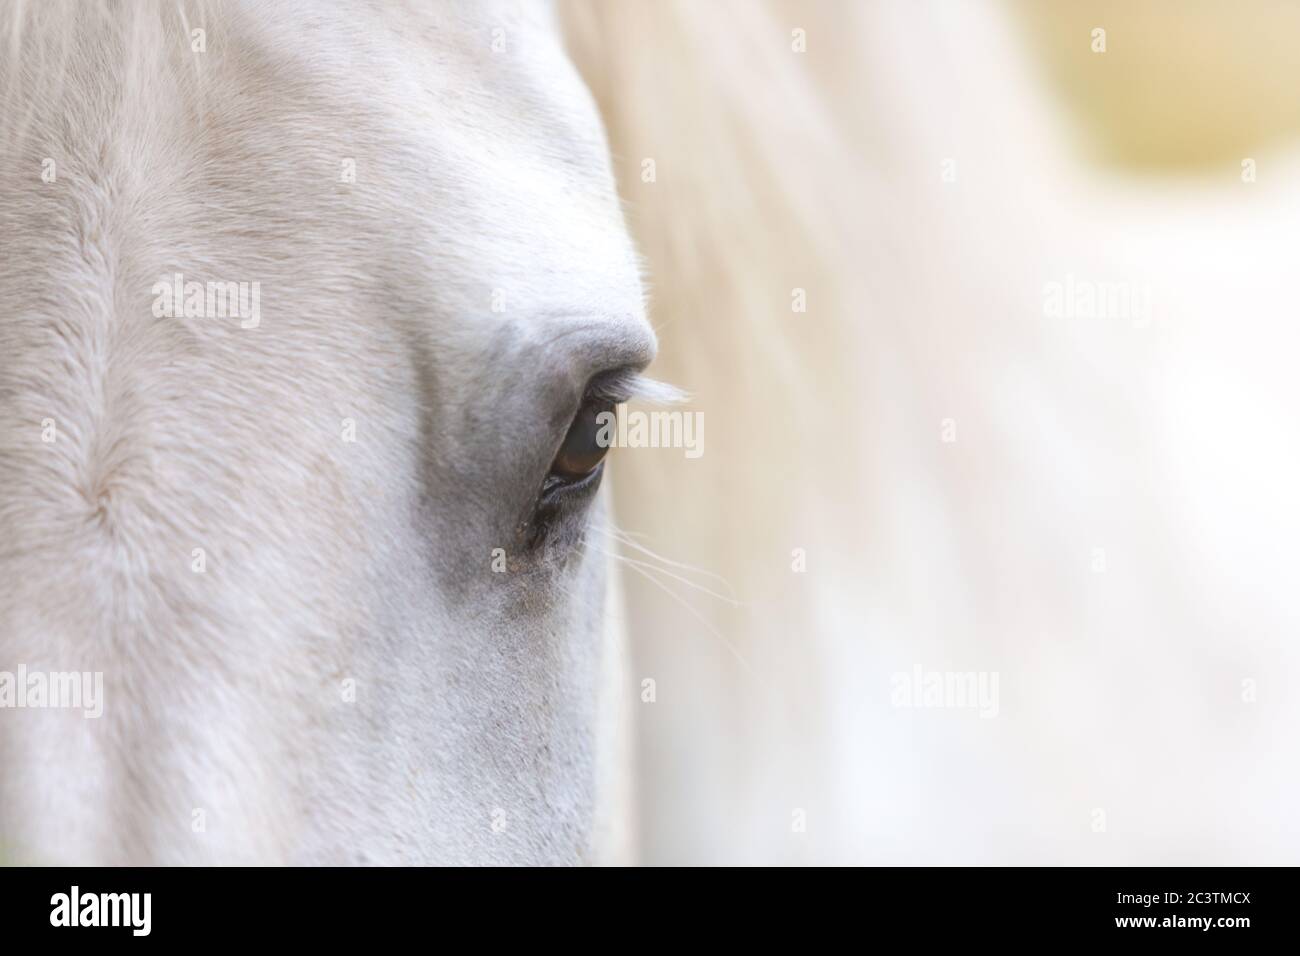 A white horse in detail Stock Photo